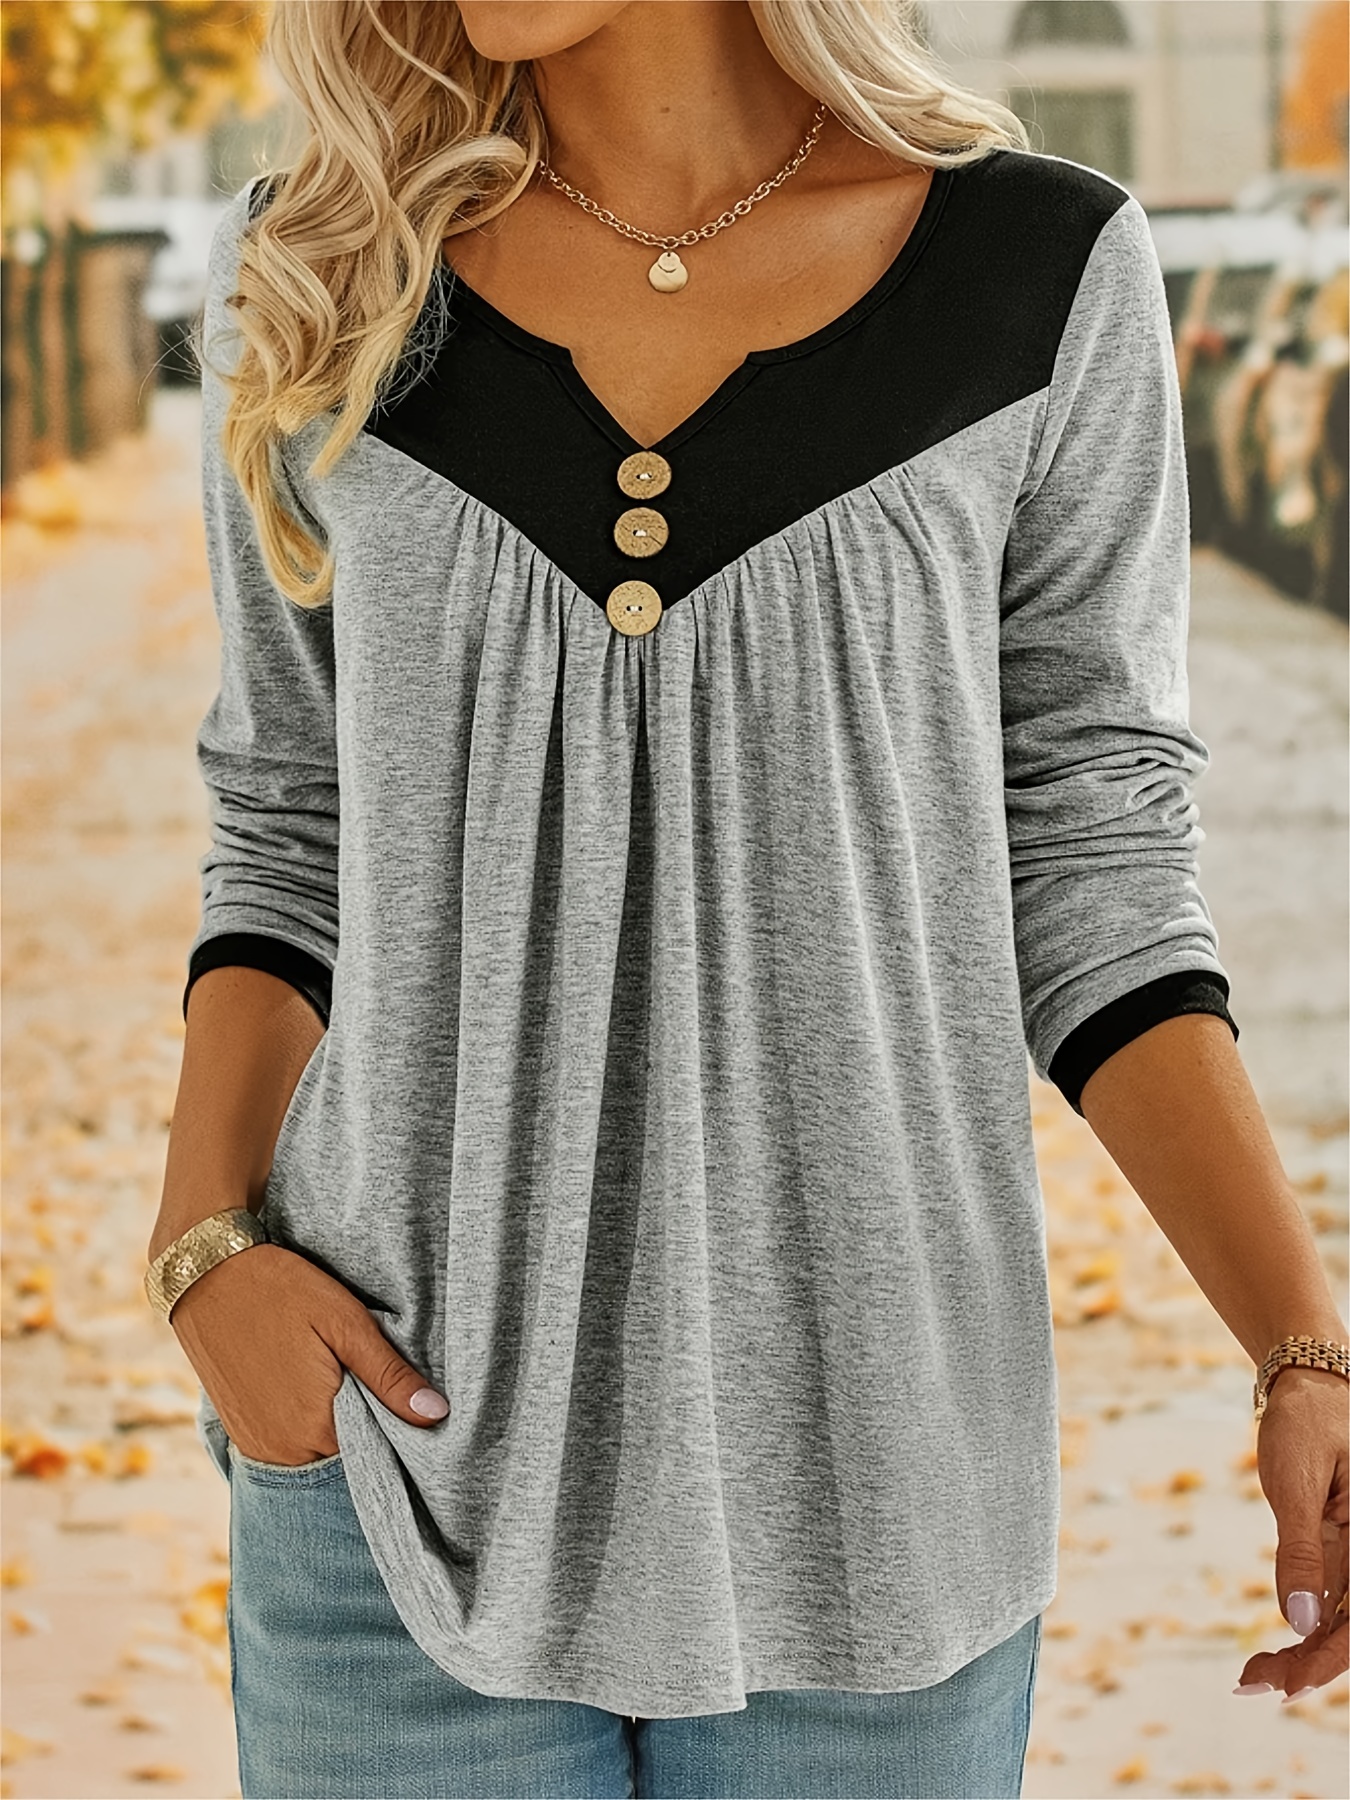 New Stylish Women Open Front Long Sleeves Asymmetric Casual Blouse